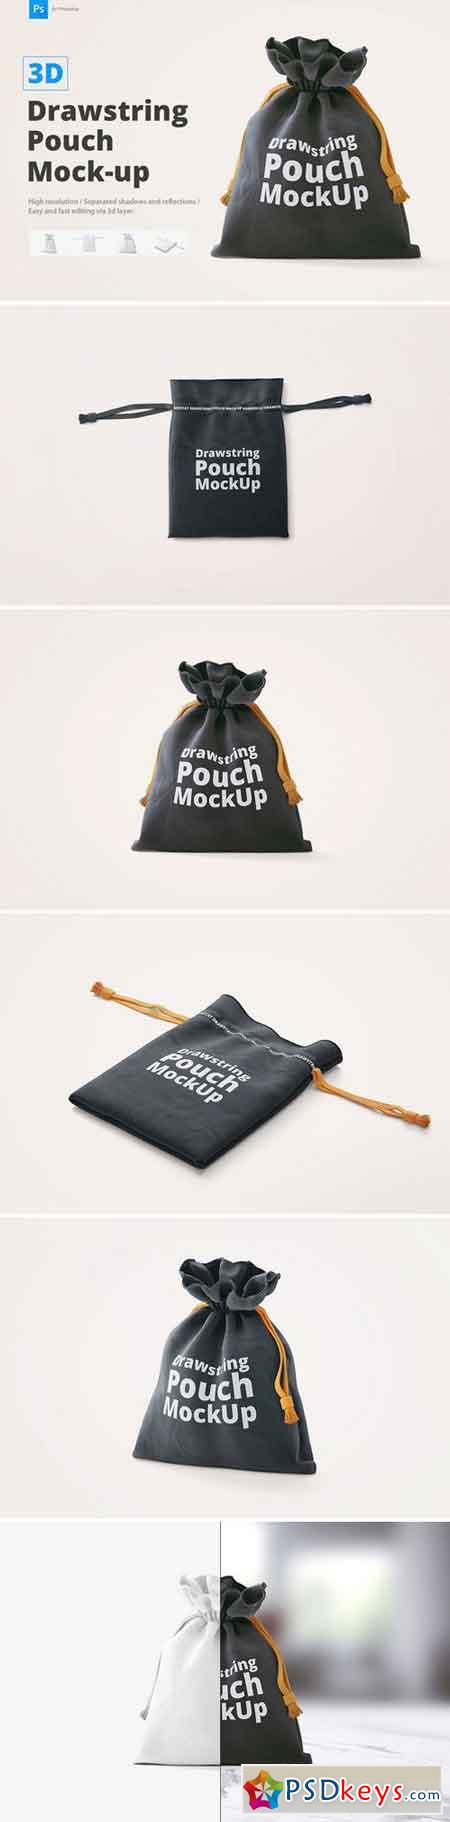 Drawstring Pouch Mock-Up 2429756